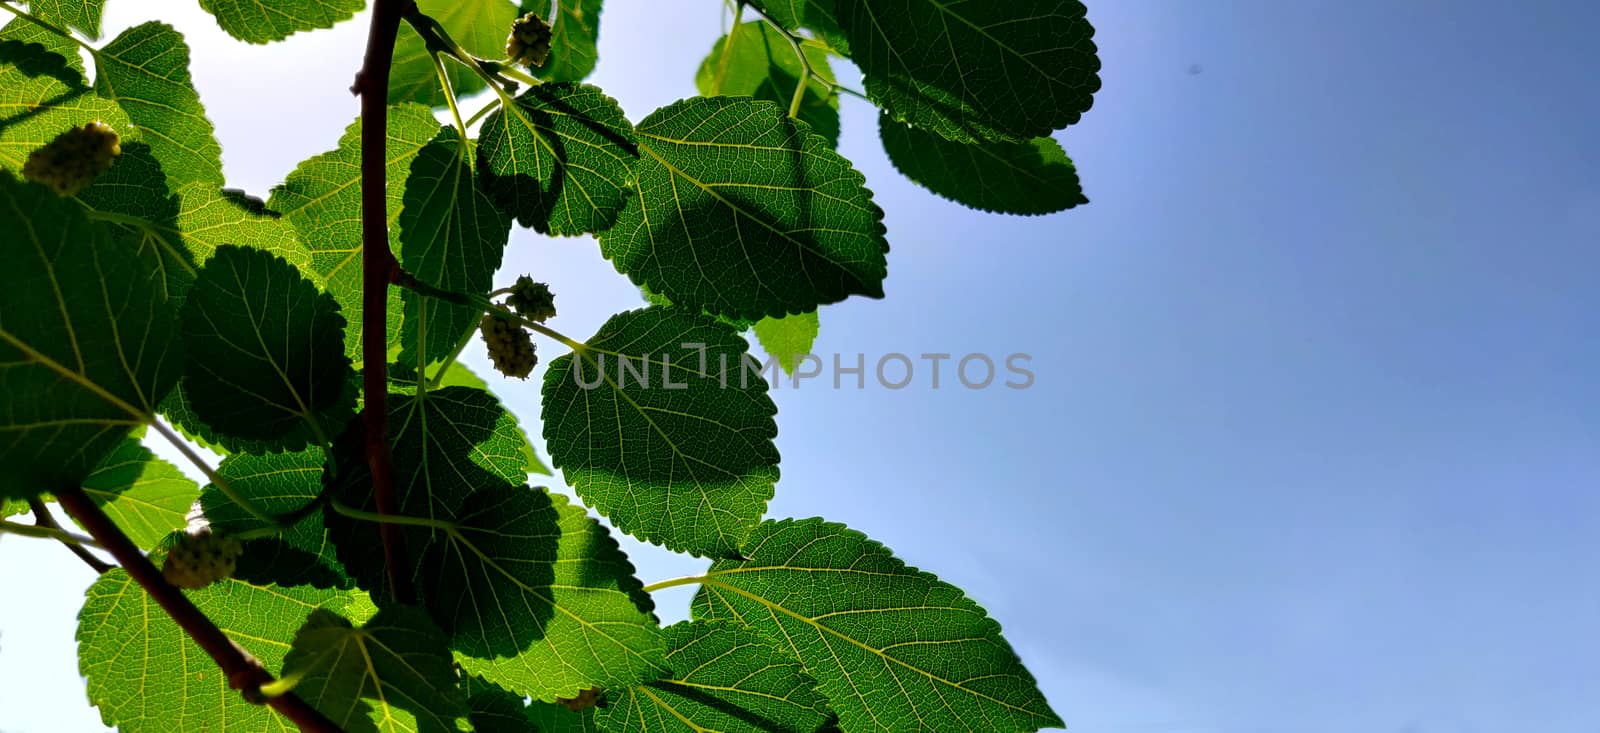 Background image of mulberry tree leaves against sun in afternoon by mshivangi92